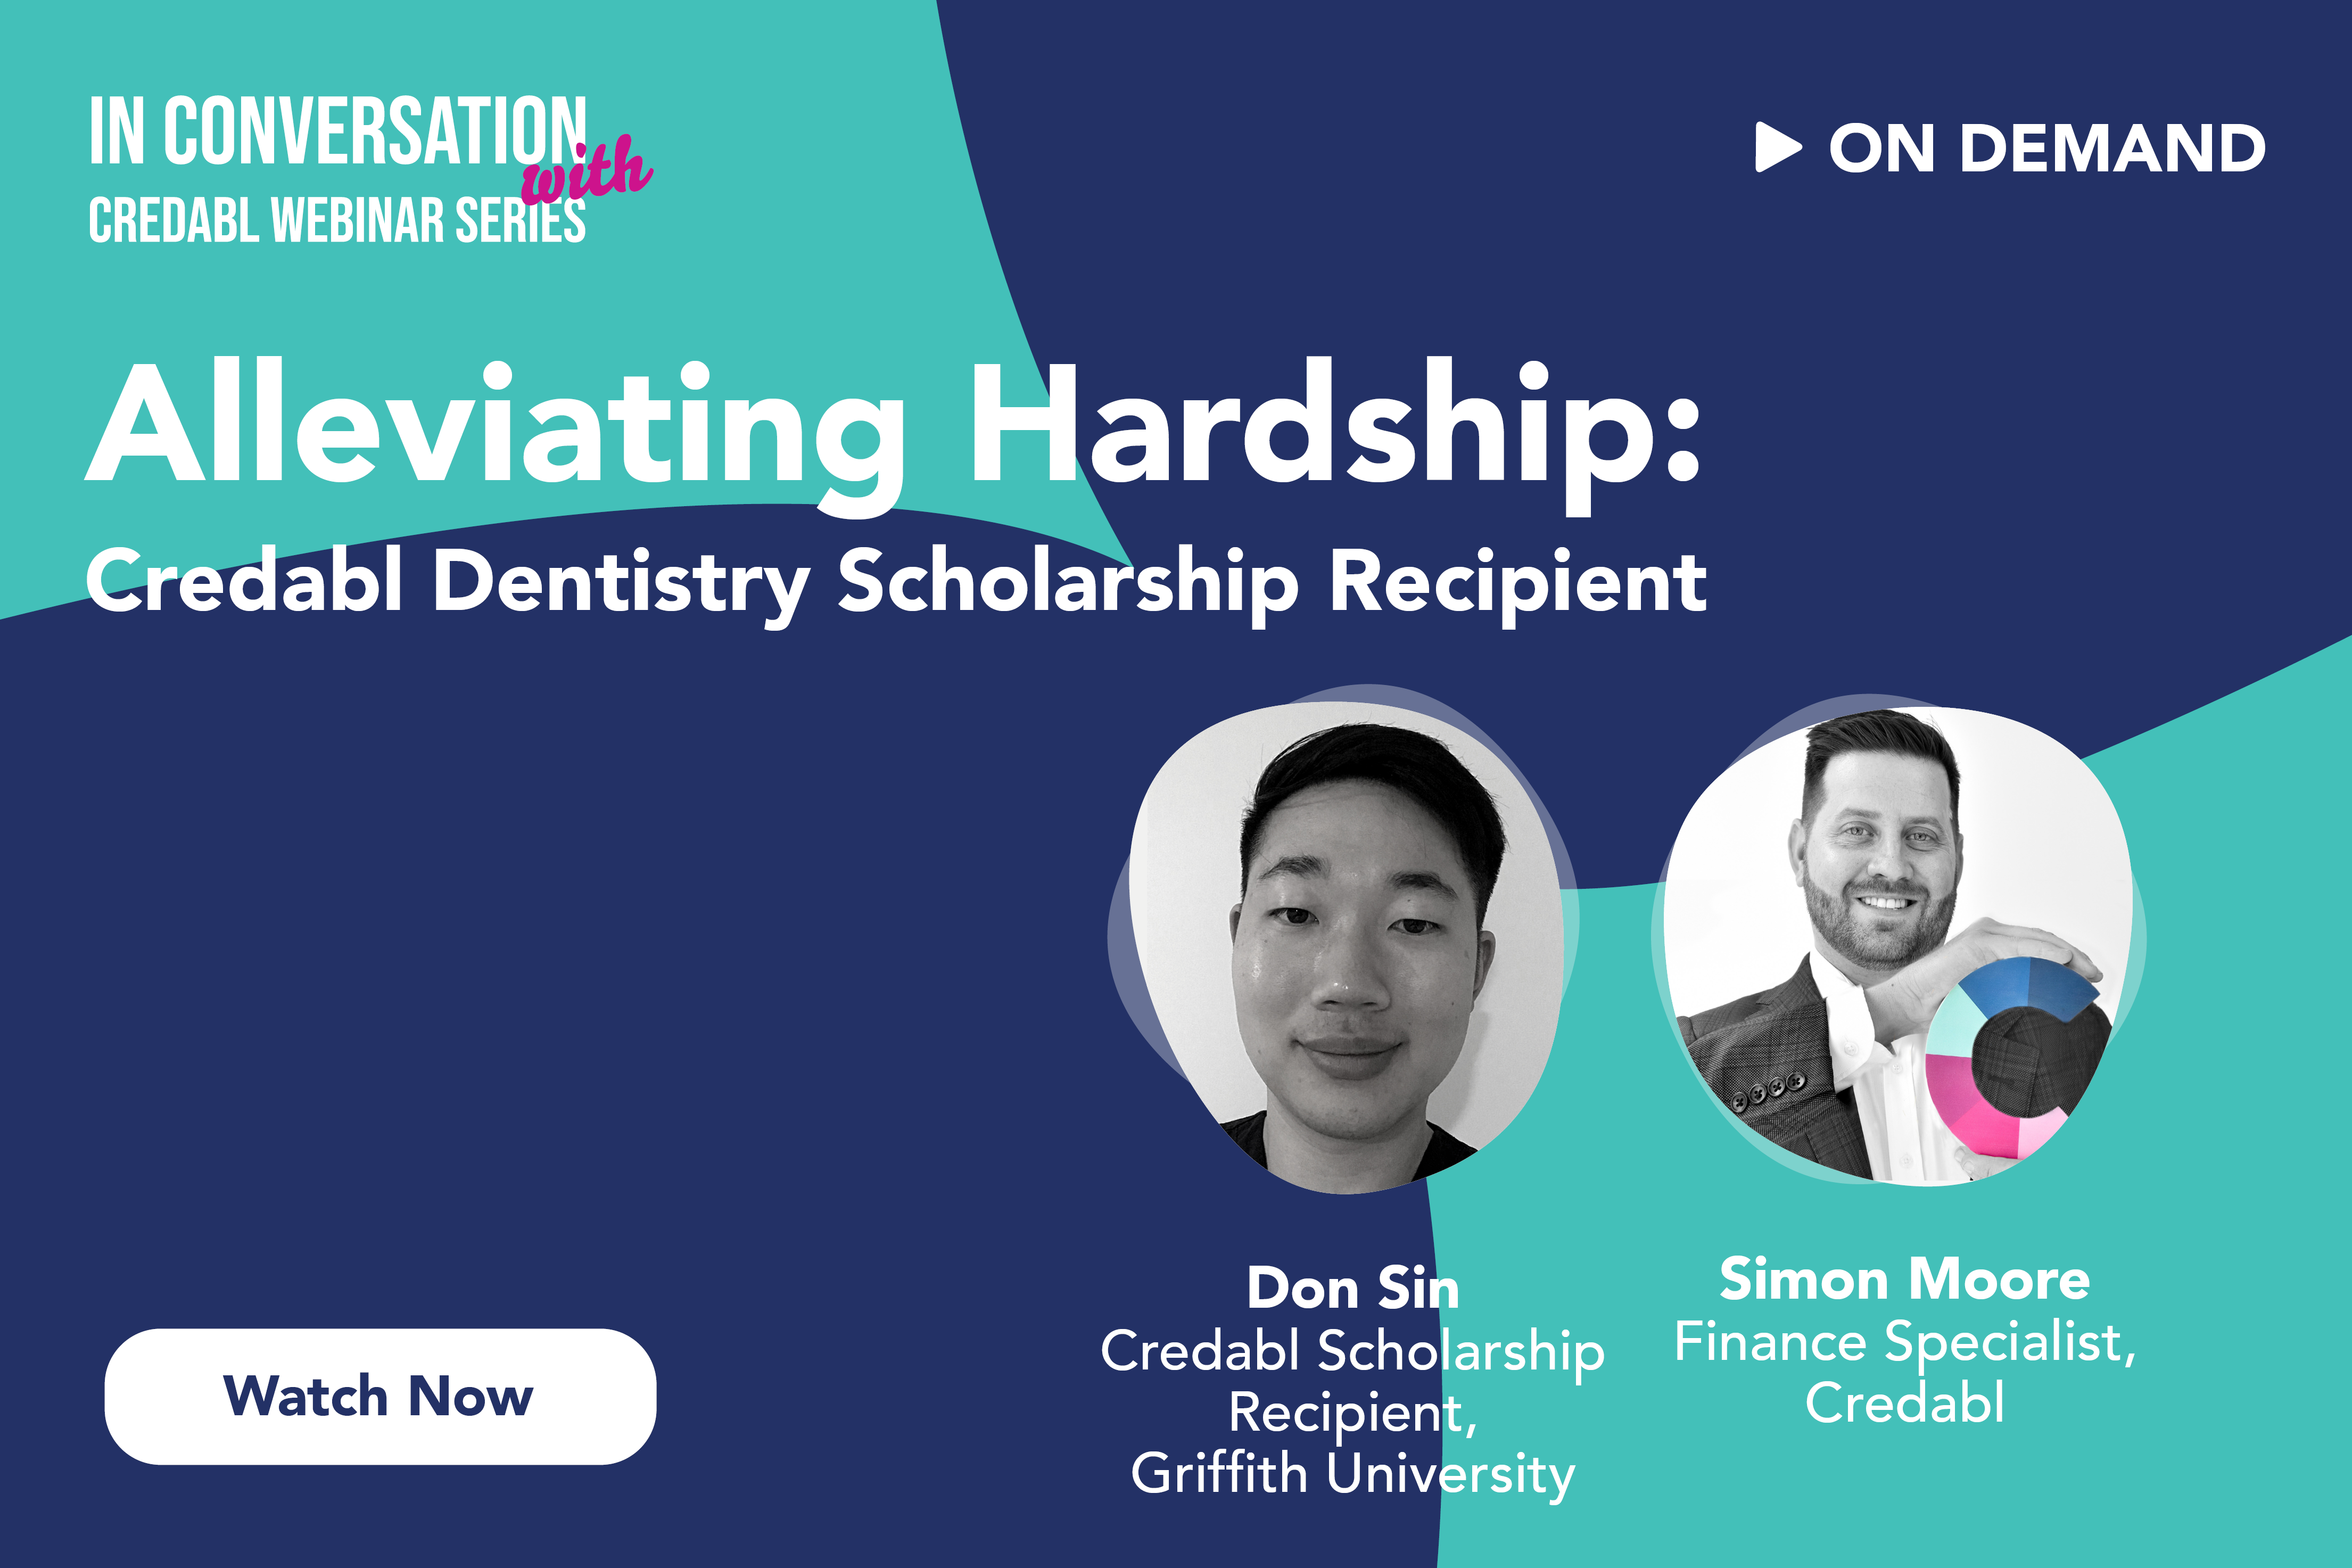 Alleviating Hardship: Exclusive Chat with Credabl Dentistry Scholarship Recipient Image